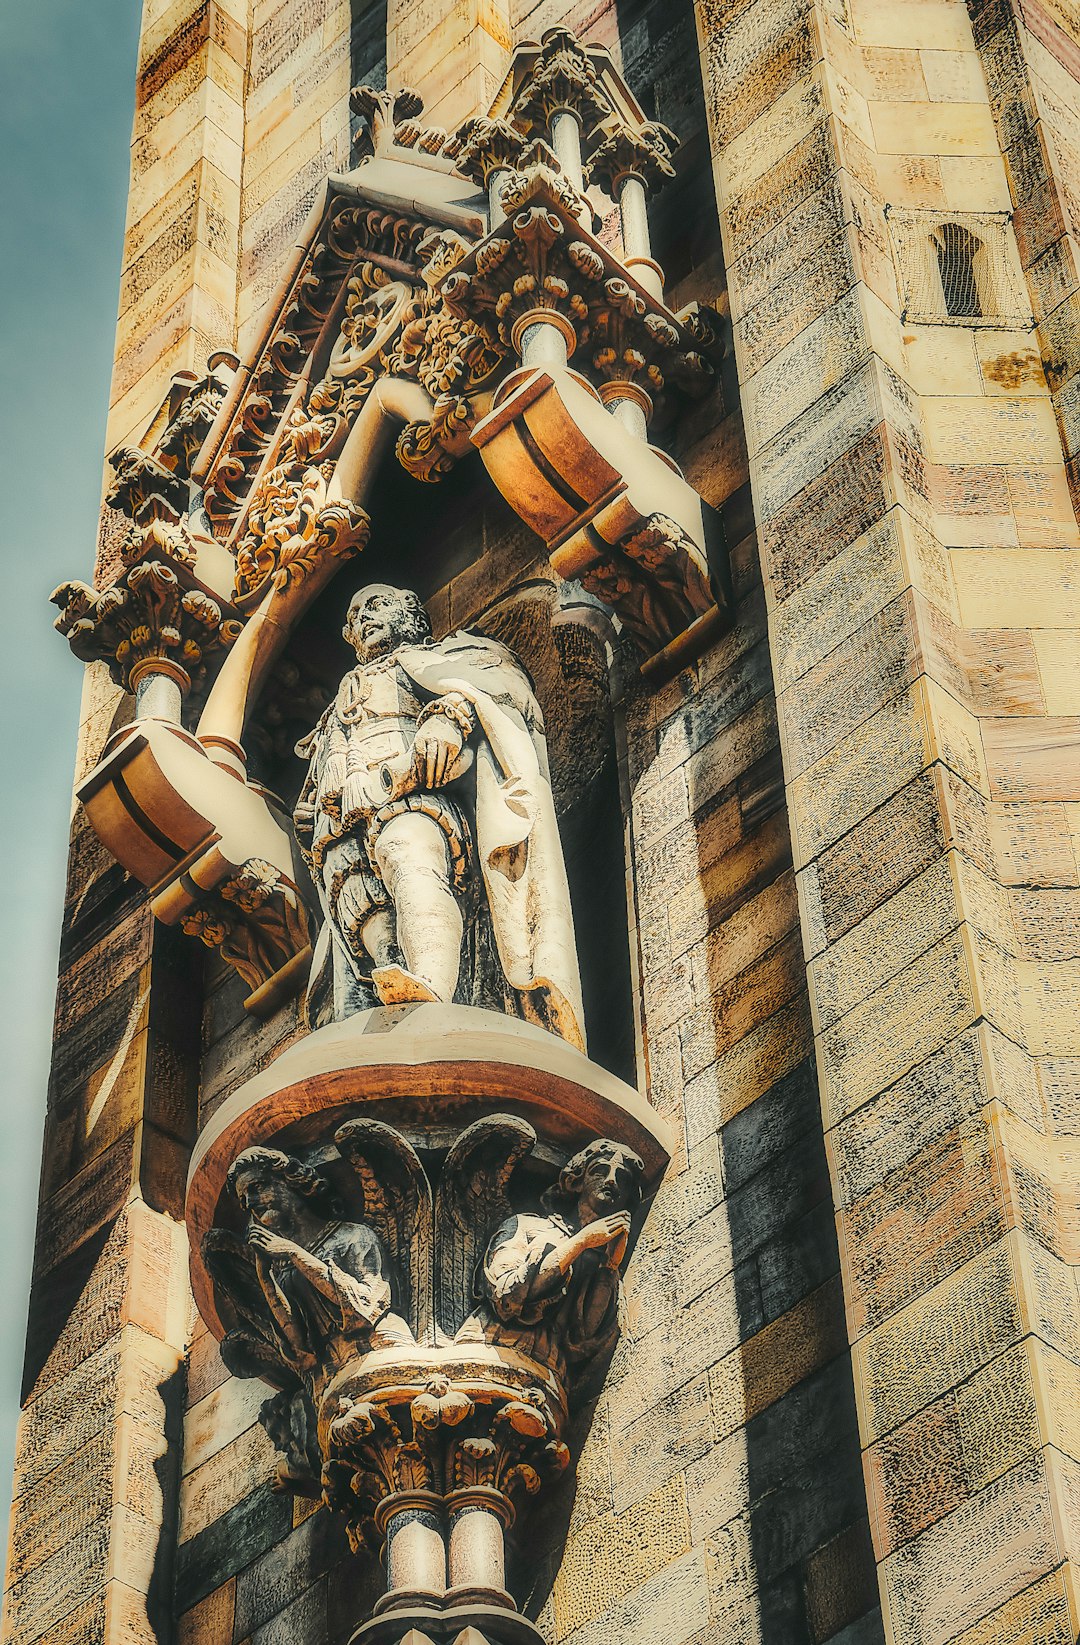 Meet Prince Albert, Queen Victoria's Royal Consort, whose likeness is captured in this statue which is prominently displayed on the clock tower bearing his name in Queen's Square in the Cathedral Quarter in Belfast's city centre (May, 2019).